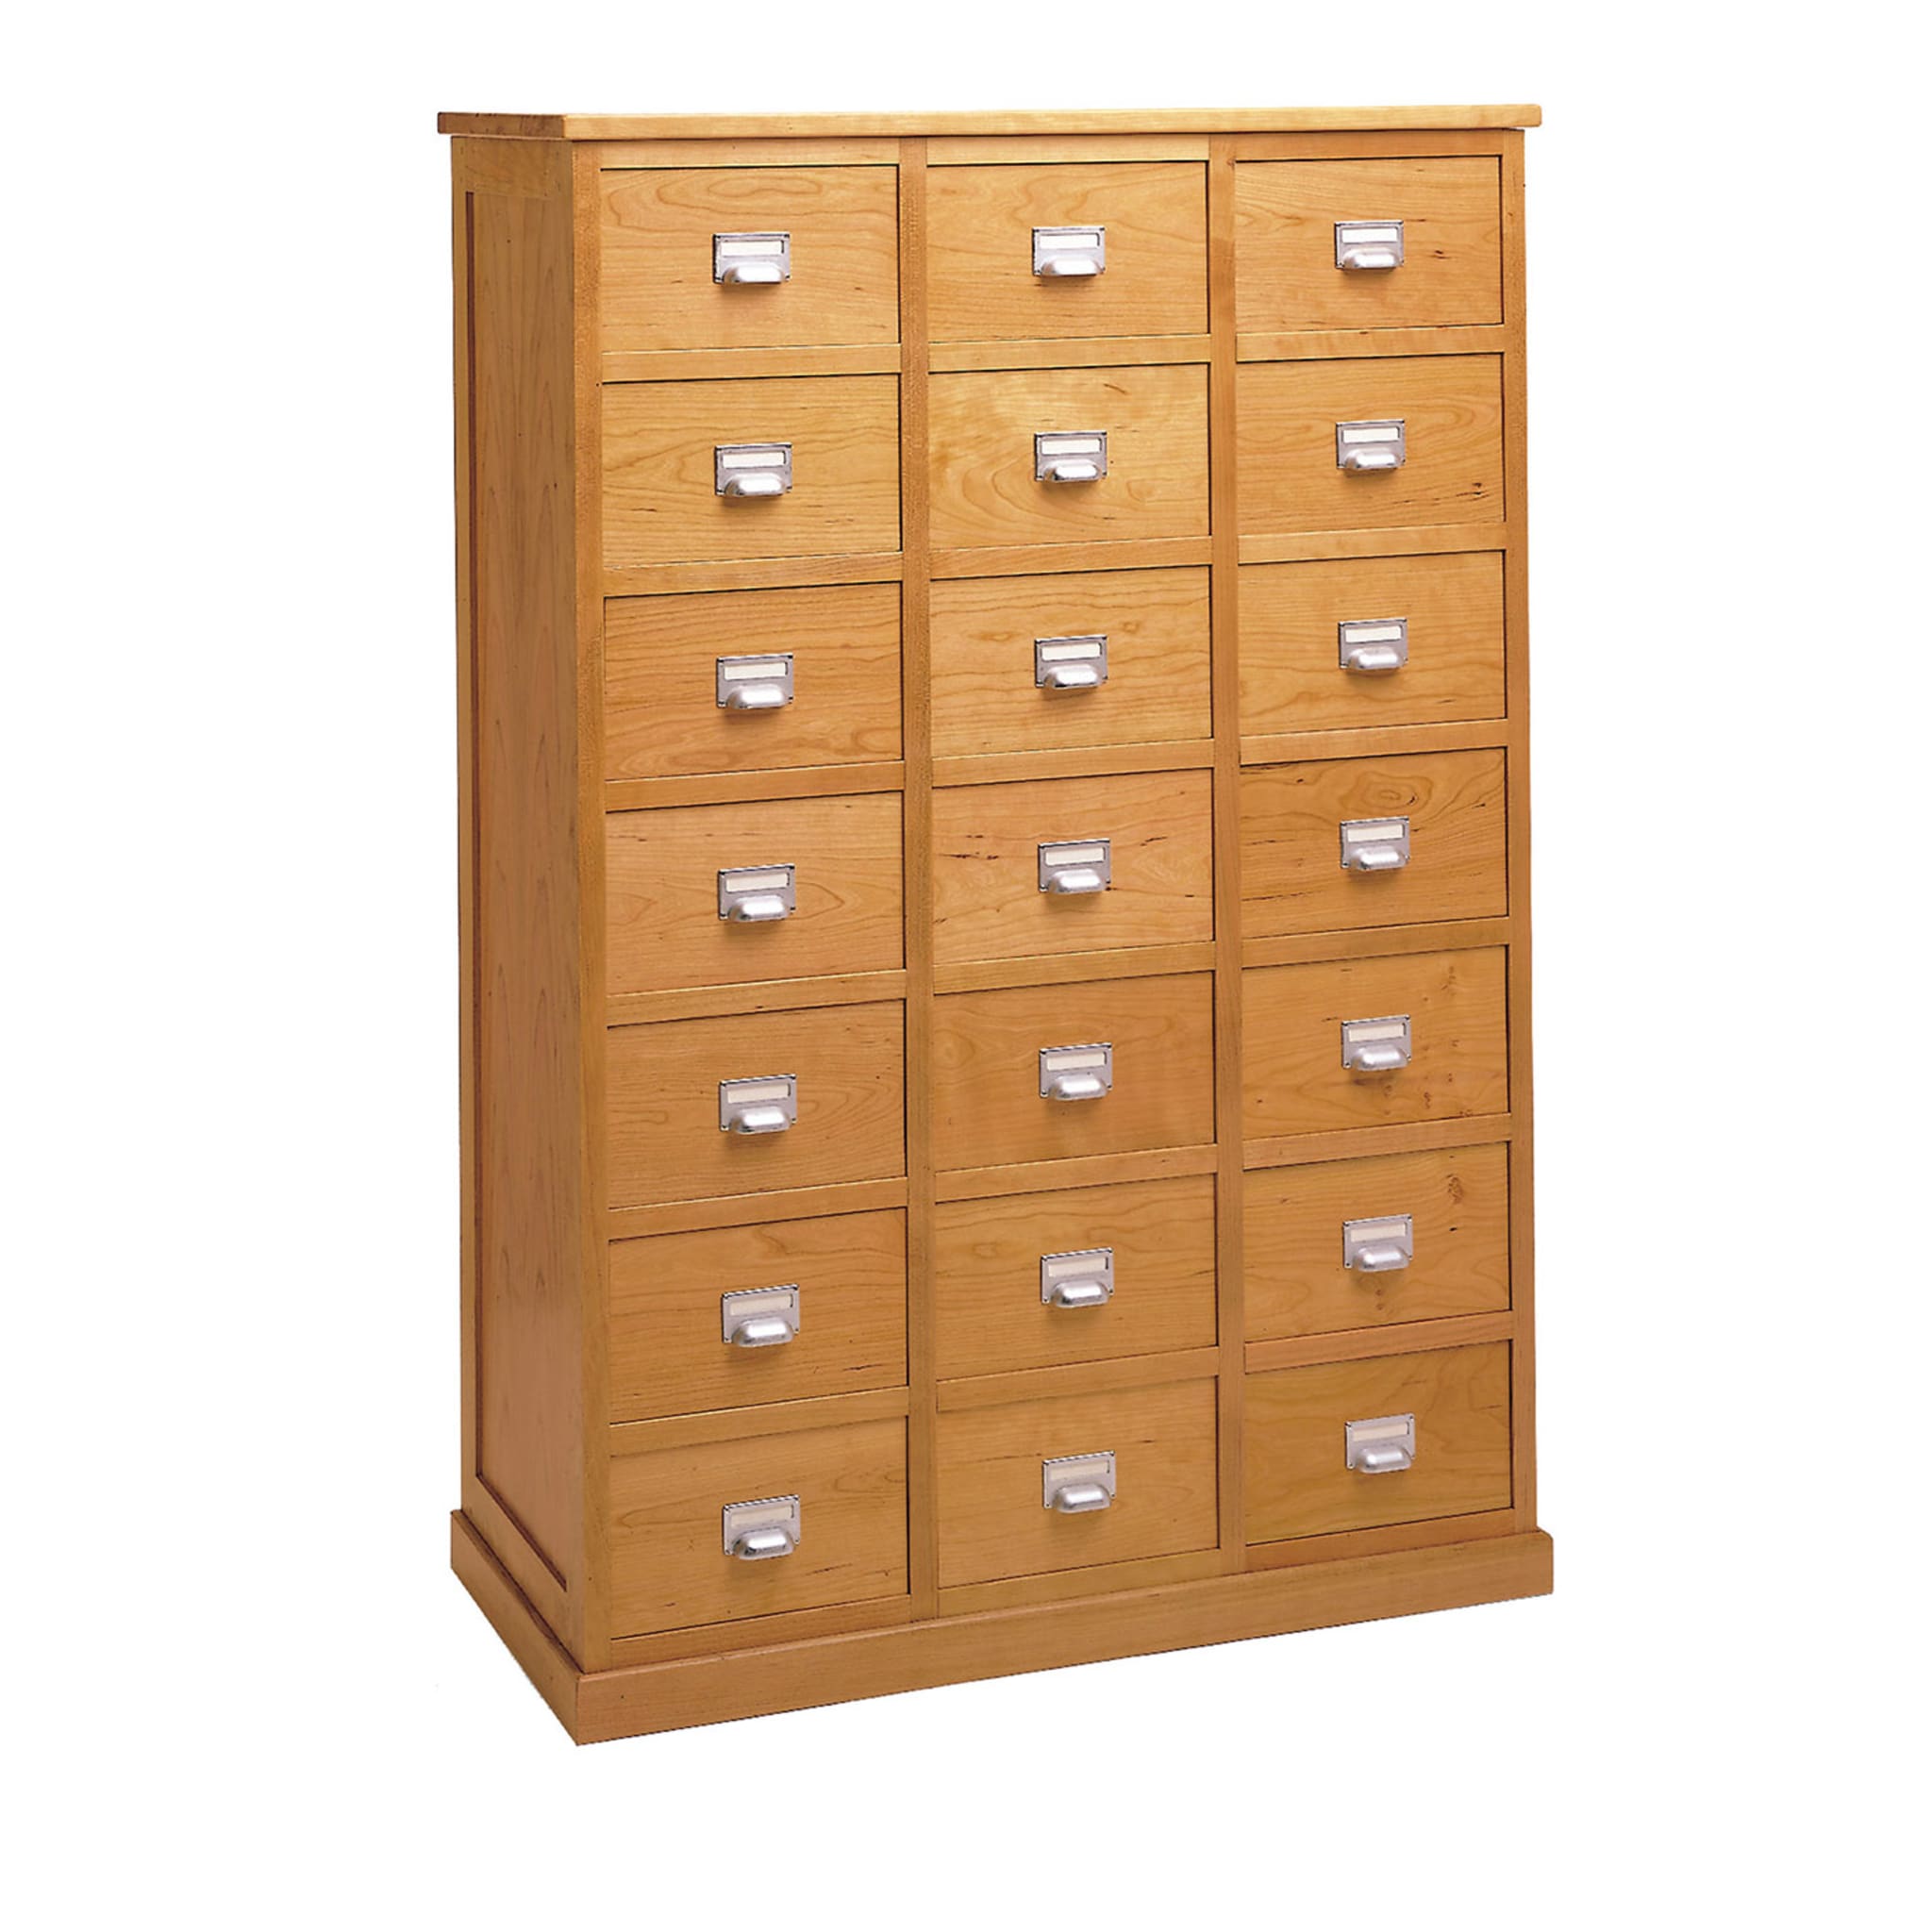 Gastonia 1.01 Durmast Chest of Drawers by C.R. & S. Riva 1920 - Main view